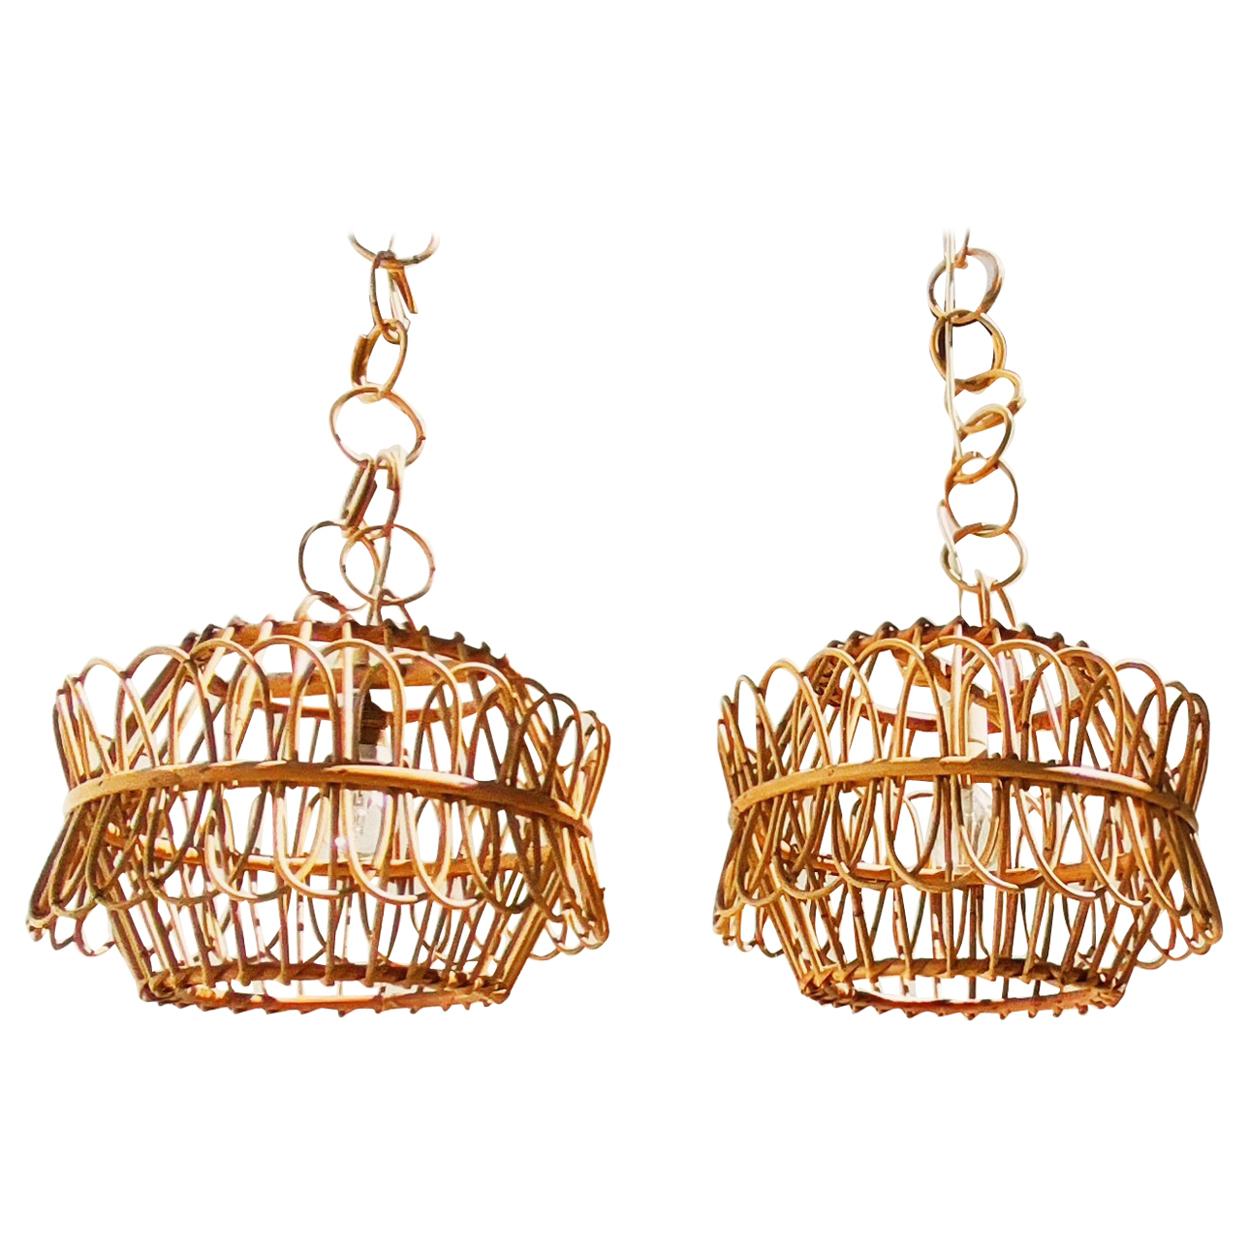 Pair of Spanish Rattan and Bamboo Chandelier, 1960s